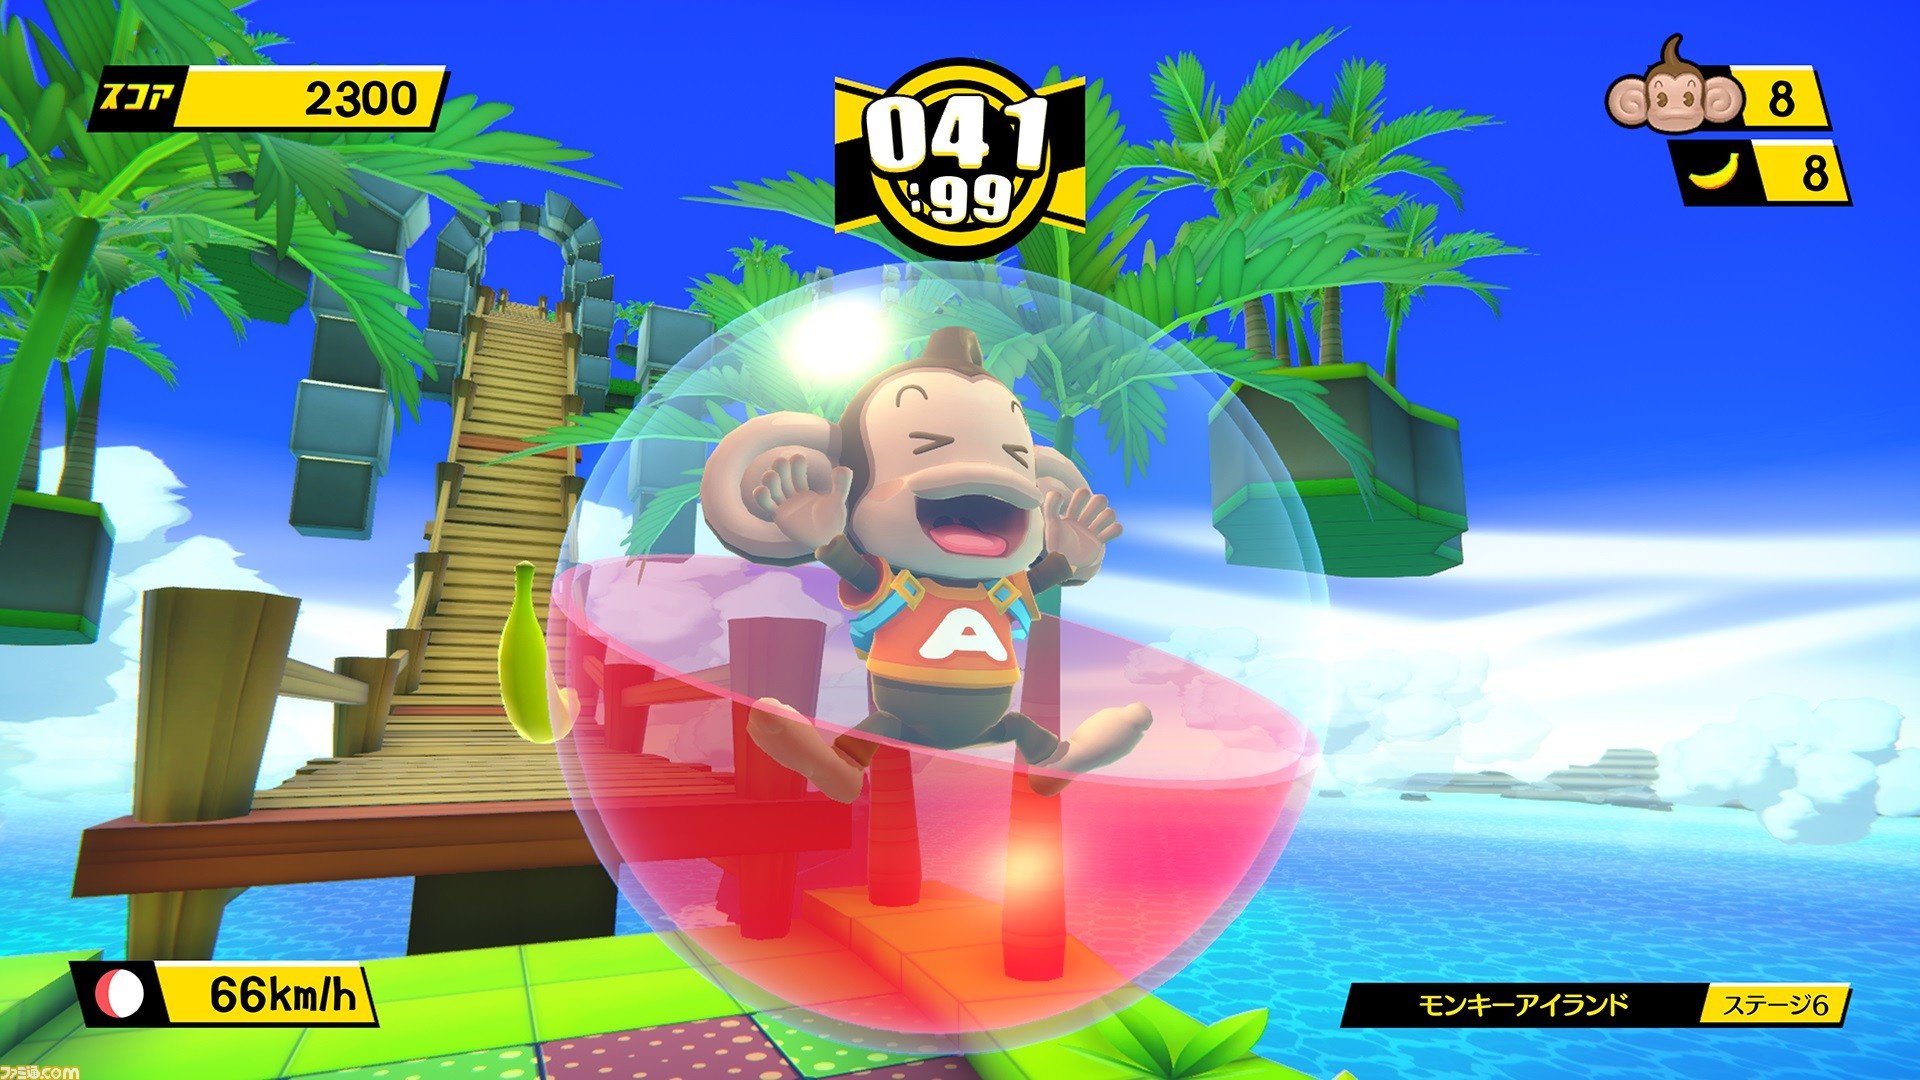 Twitter Poll Suggests A Brand New Super Monkey Ball Game Could Be